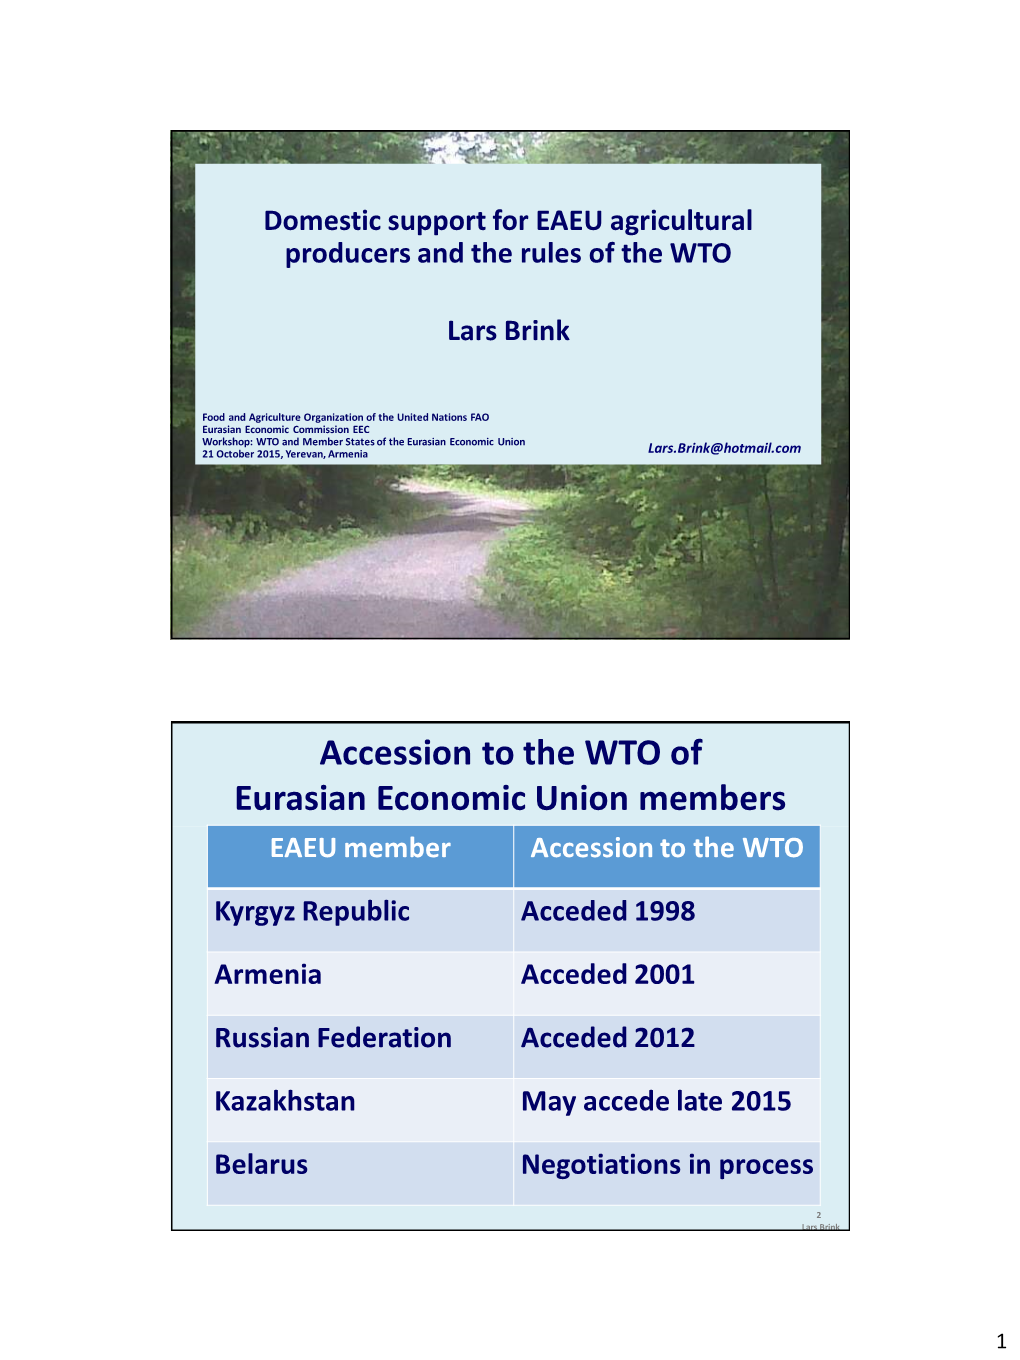 Accession to the WTO of Eurasian Economic Union Members EAEU Member Accession to the WTO